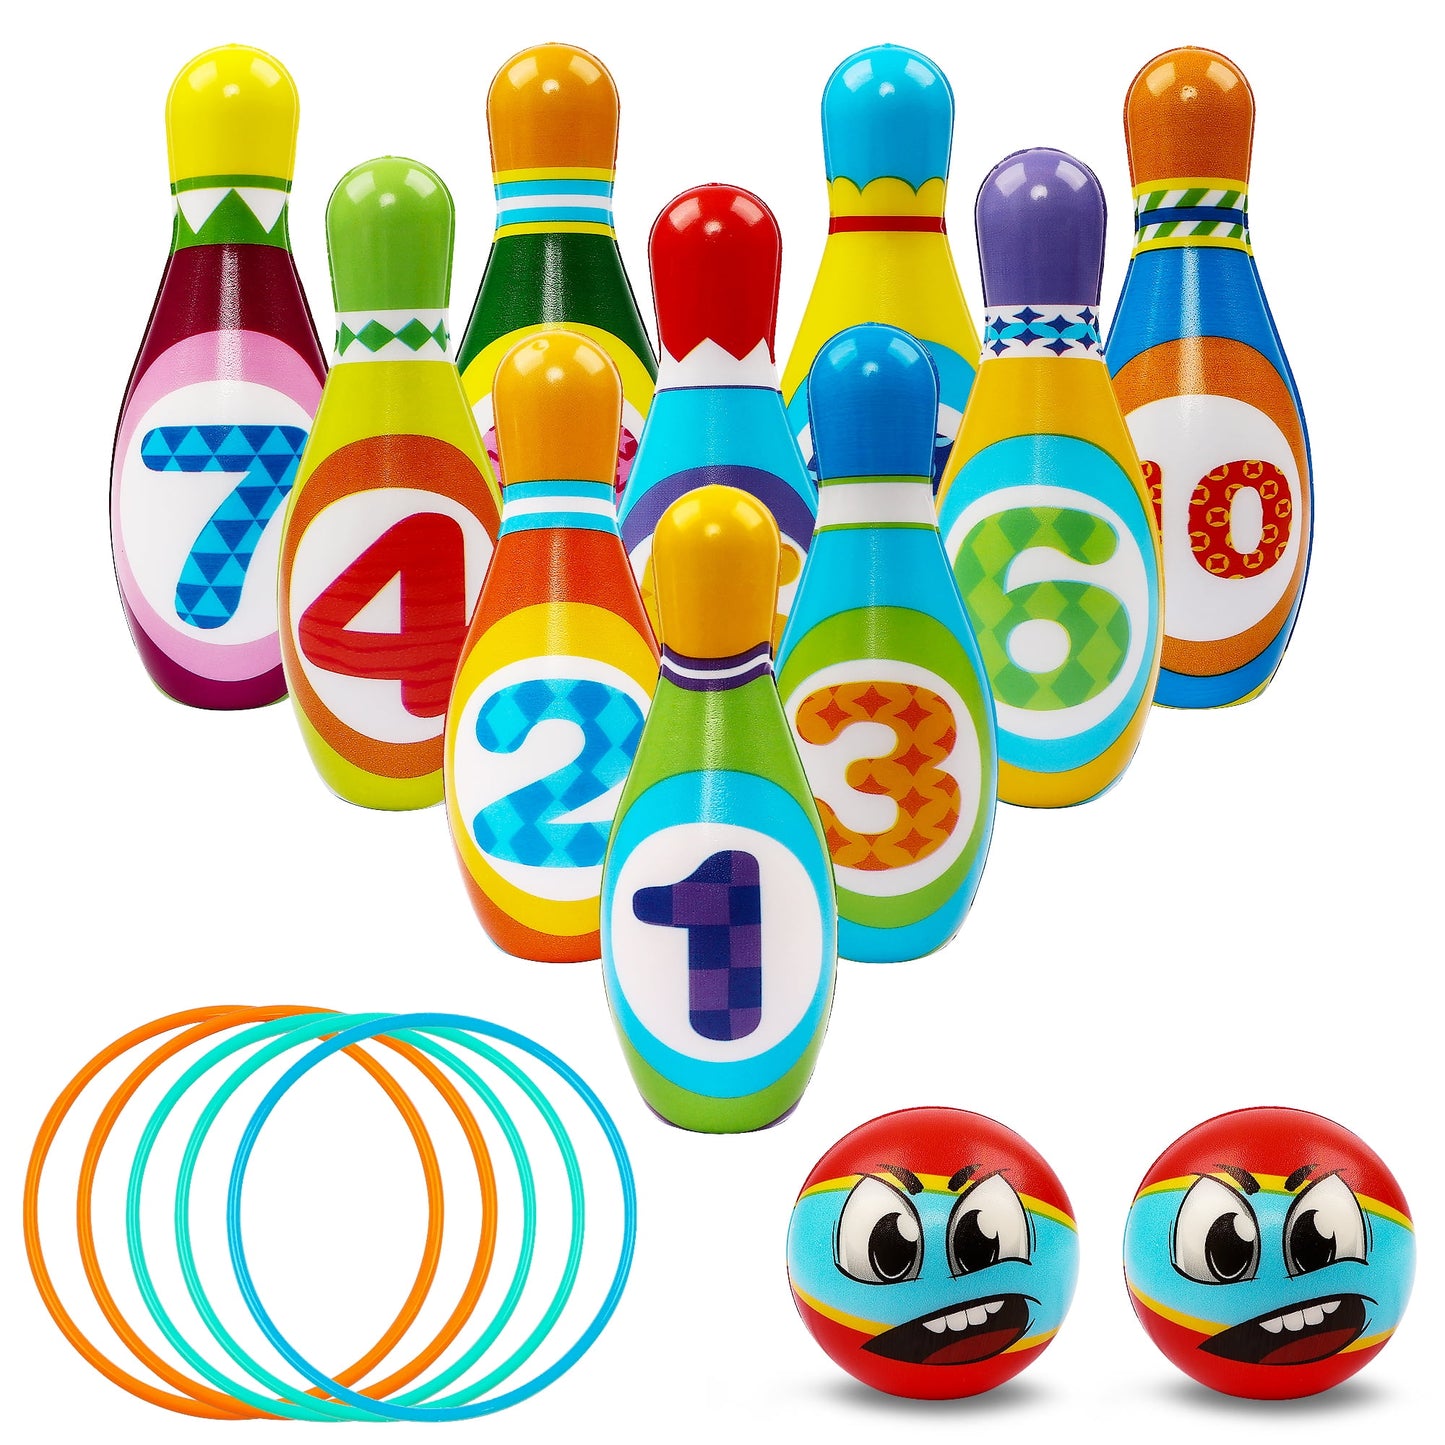 Kids Bowling Set Includes 10 Bowling Pins & 2 Balls,Toddler Indoor Outdoor Activity Play Toys,Gift for 3-6 Year Old Boys Girls